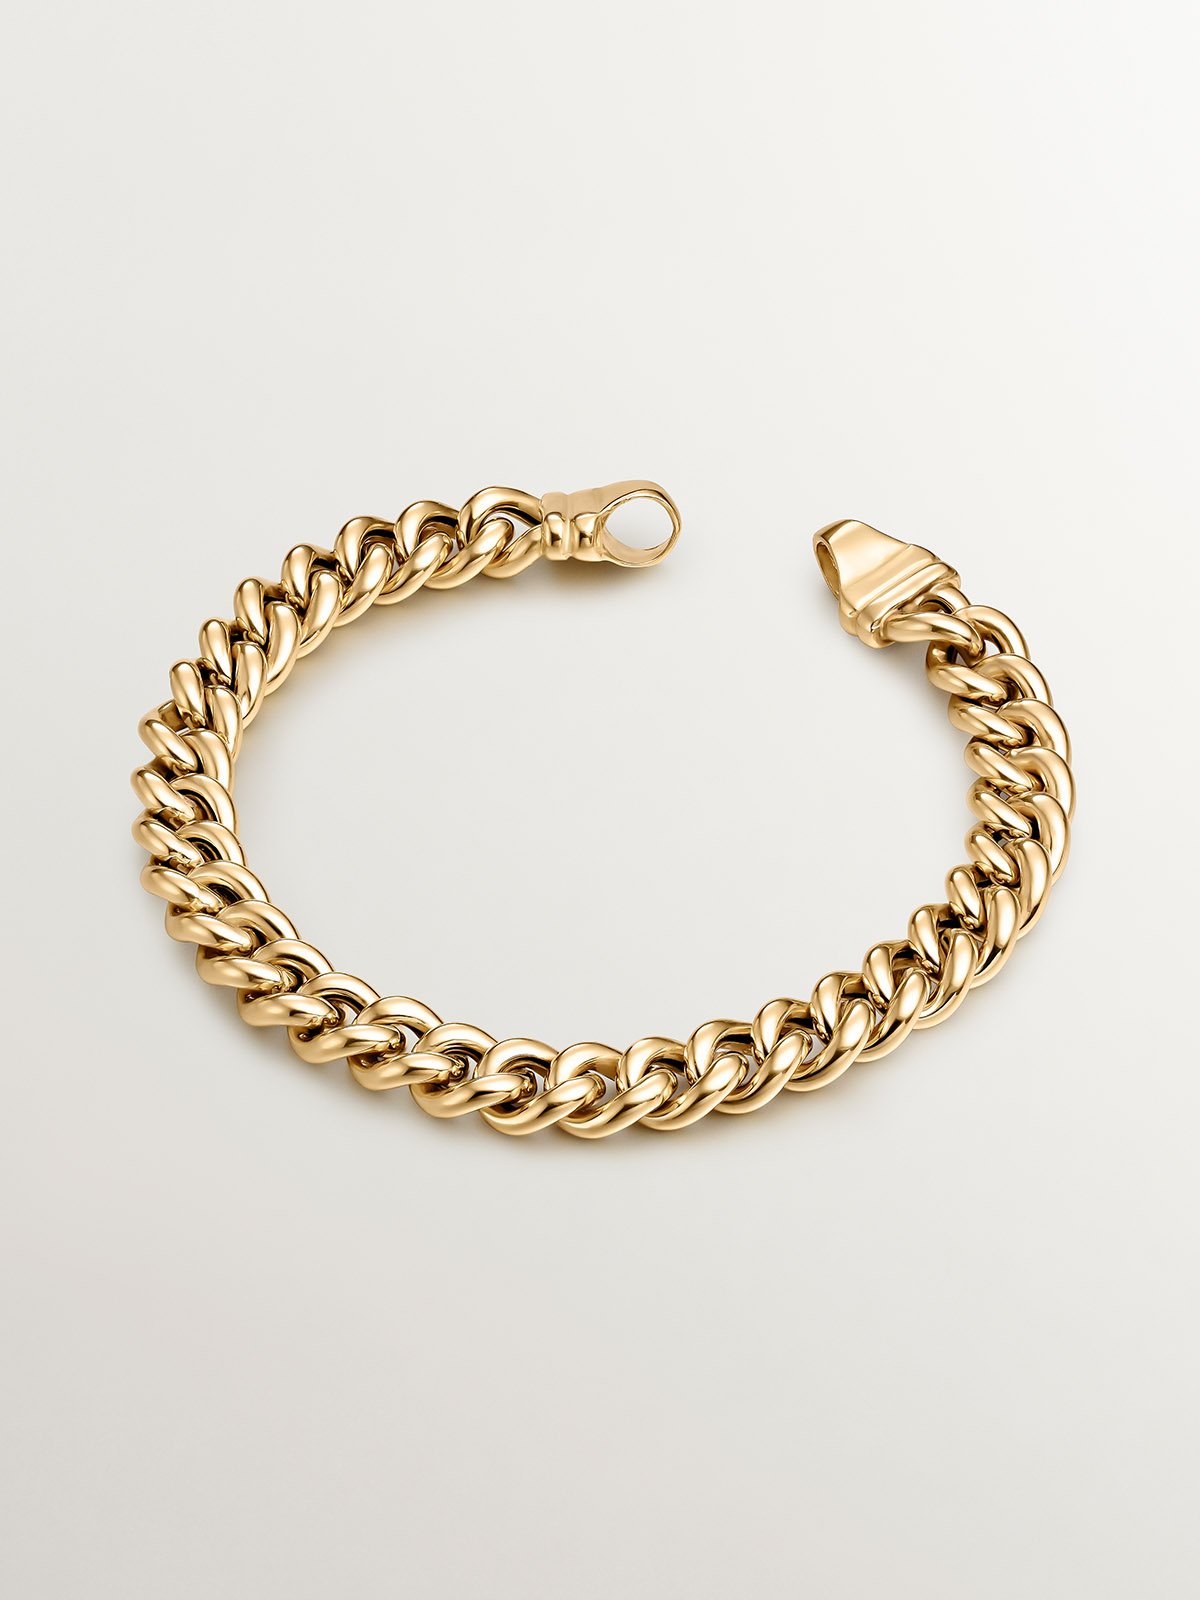 Barbados link chain bracelet in 925 silver plated in 18K yellow gold.